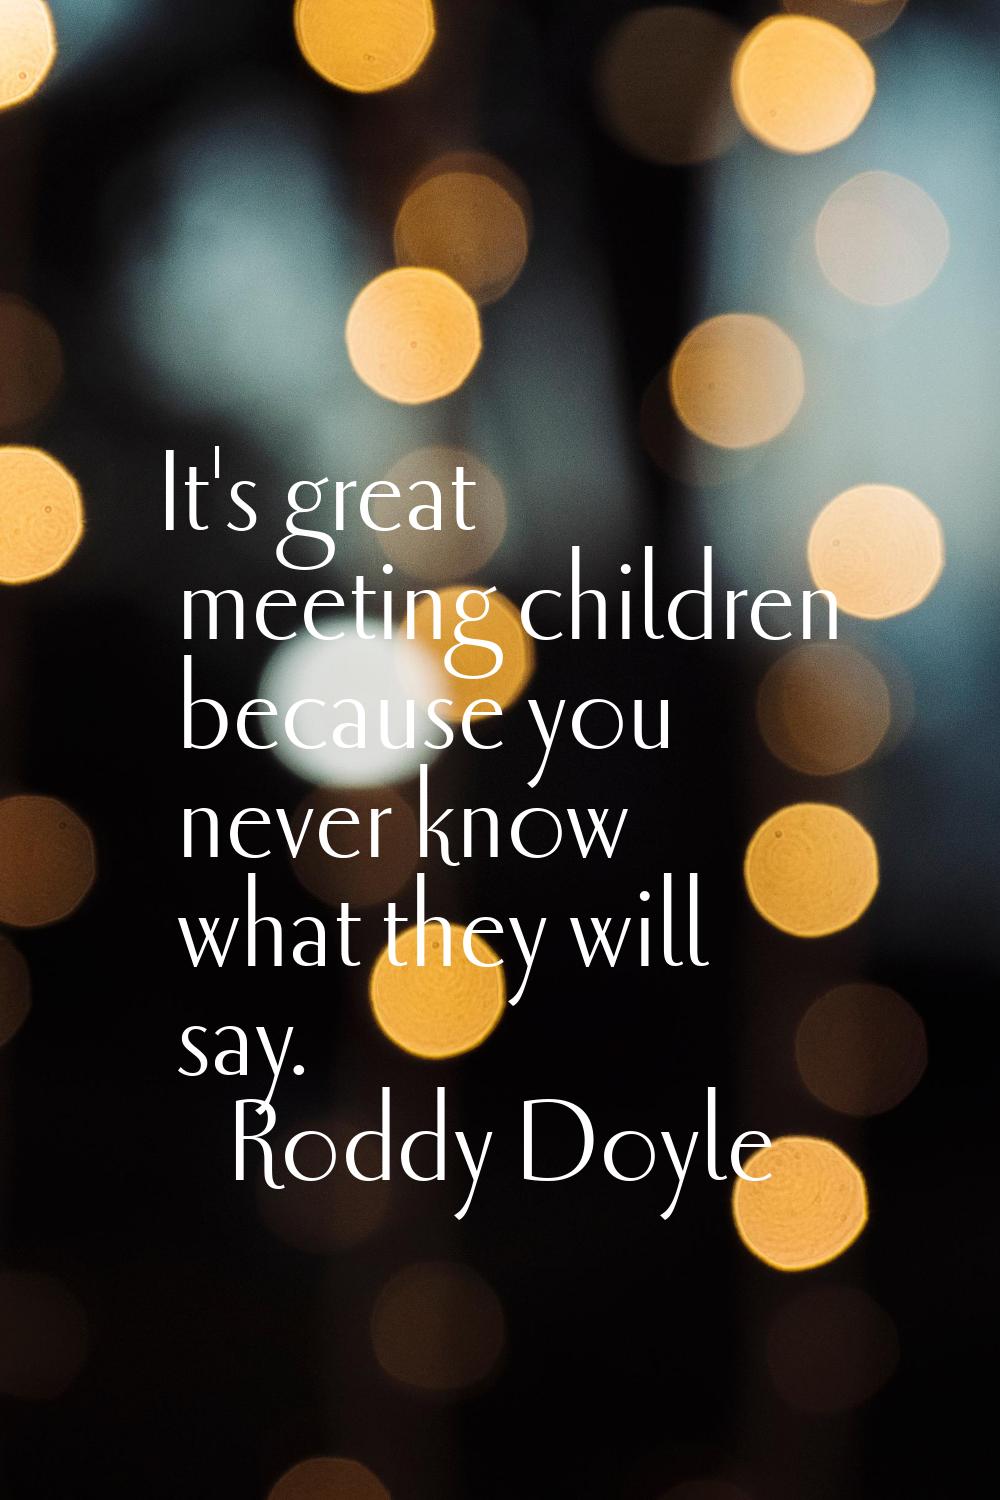 It's great meeting children because you never know what they will say.